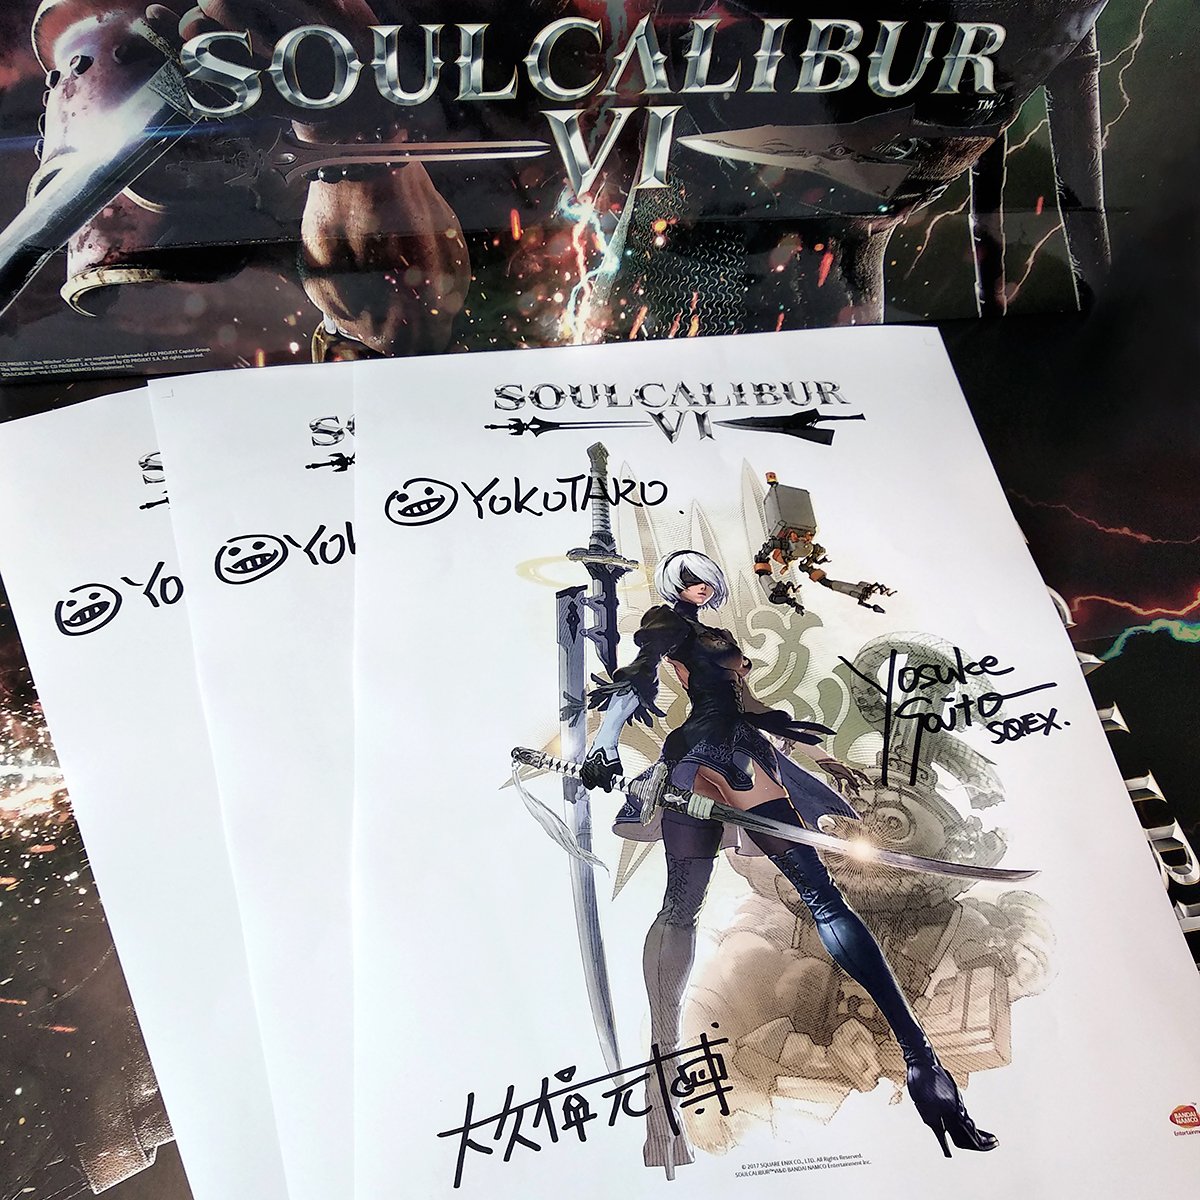 As a reward for your patience, we’re giving away three exclusive posters of 2B from @NieRGame, signed by @yokotaro, @saitoyosuke_z and @achilles_Okubo! To enter:
⚔ RT + tag your favorite #SOULCALIBUR VI partner 
🕔 Ends December 20, 5 PM CET/8 AM PST